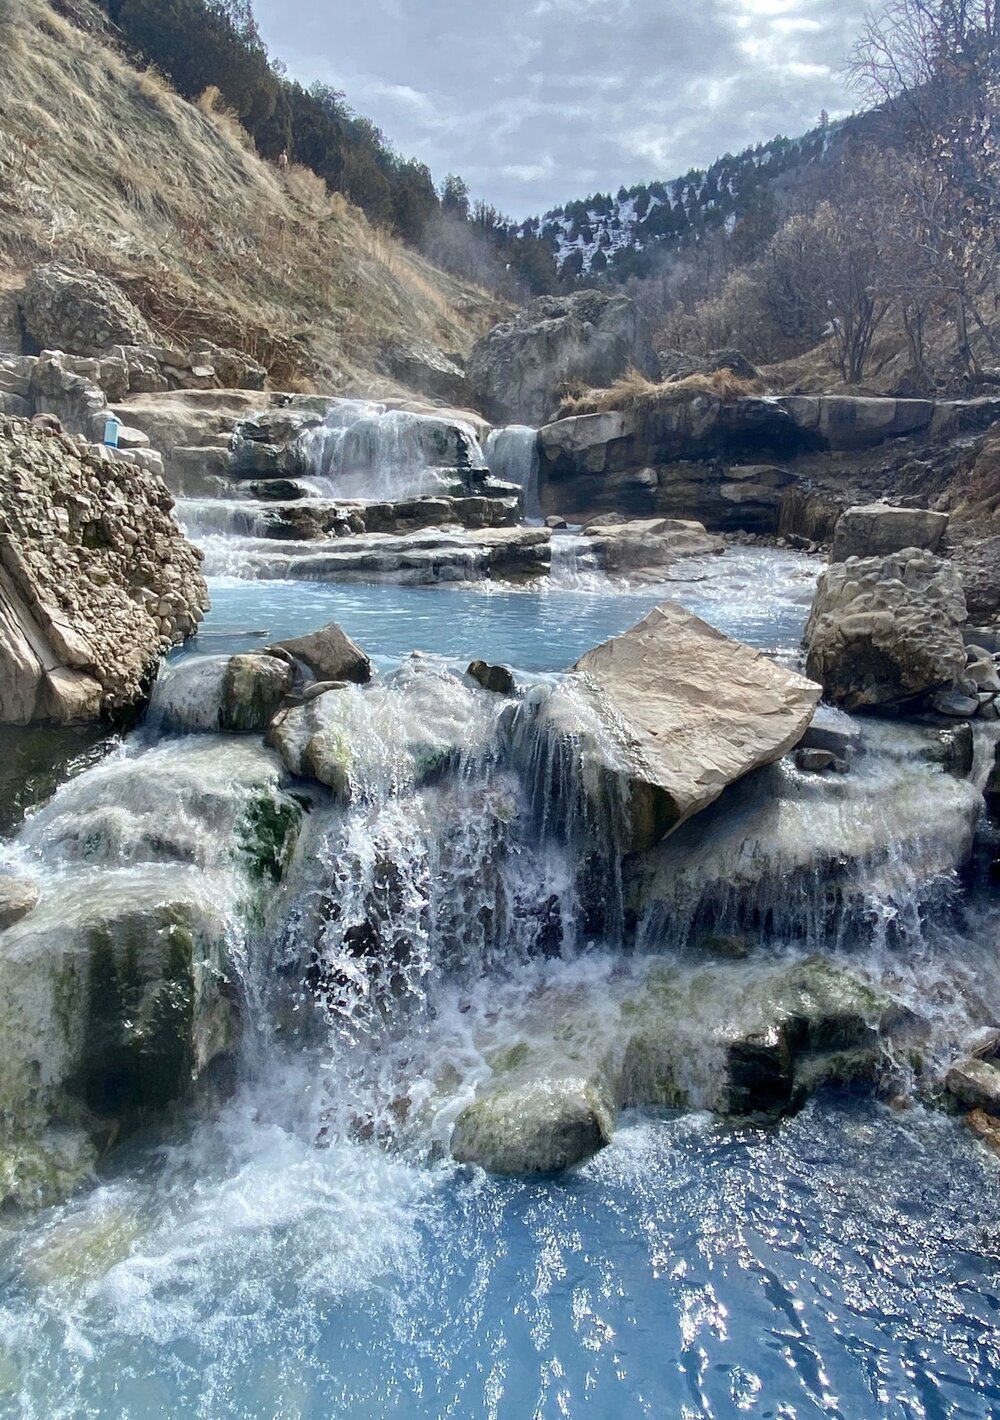  Fifth Water Hot Springs - Photo from AllTrails.com 